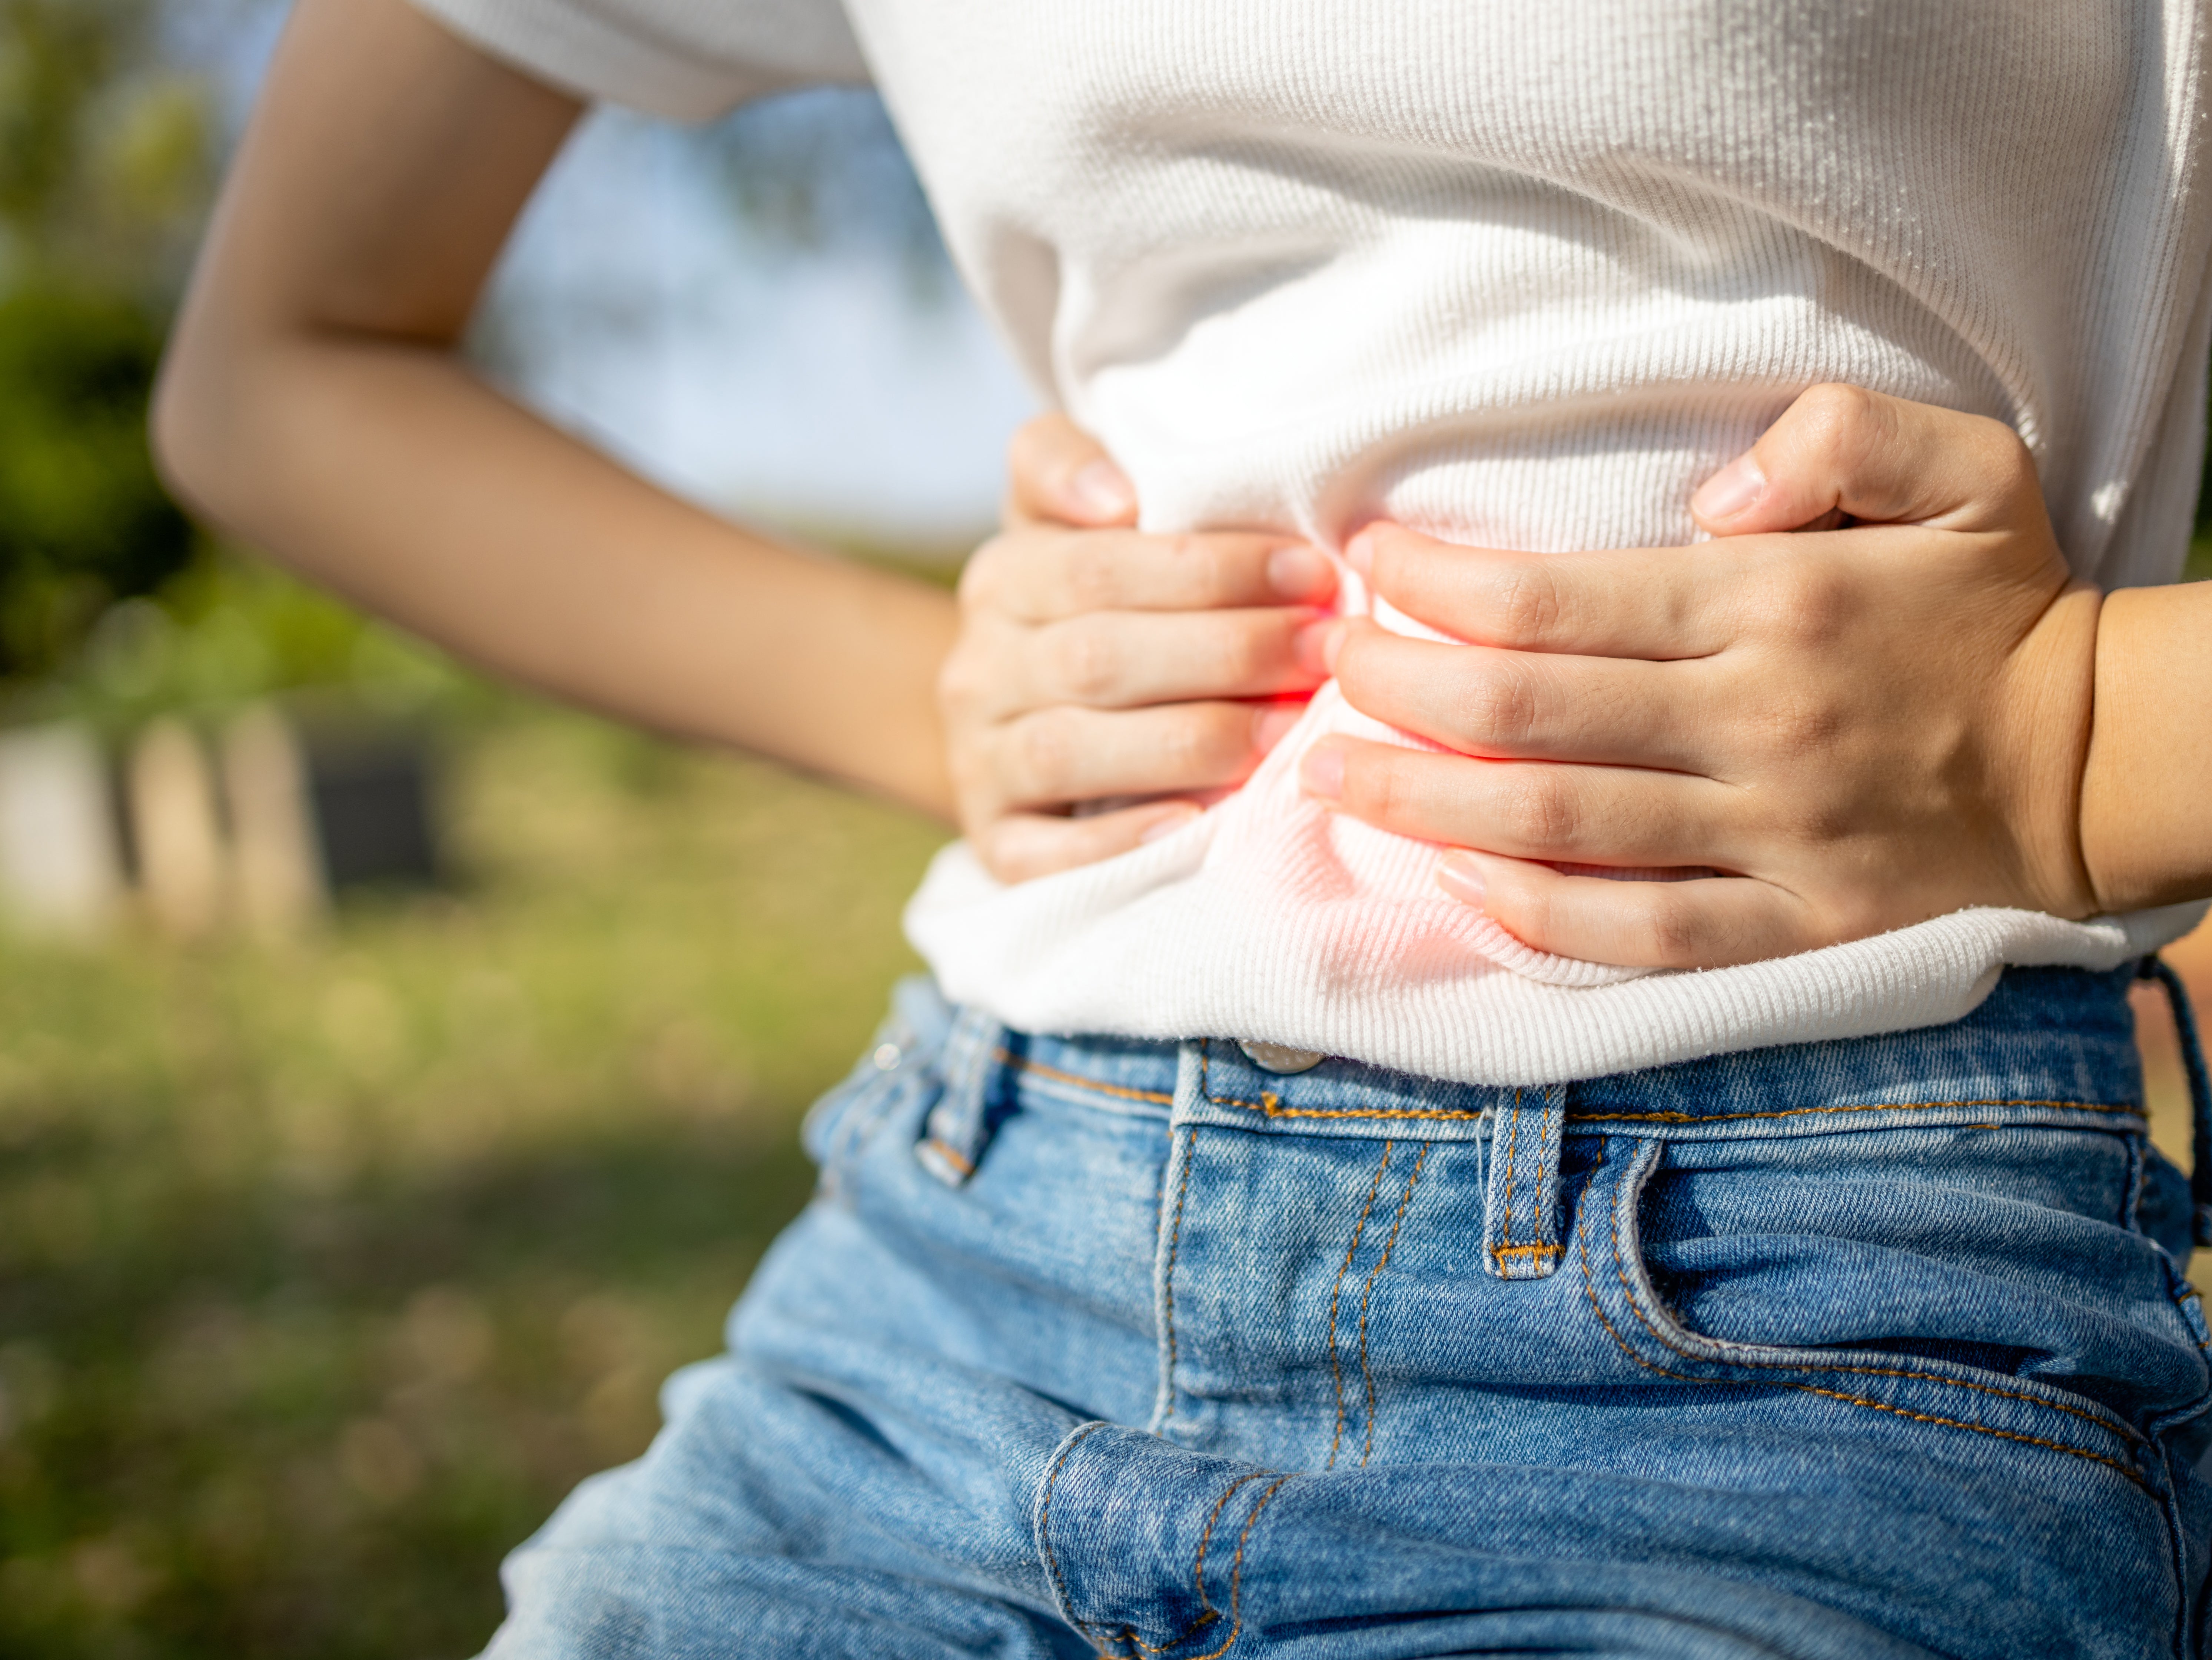 Abdominal pain is one of the most unpleasant consequences of the virus